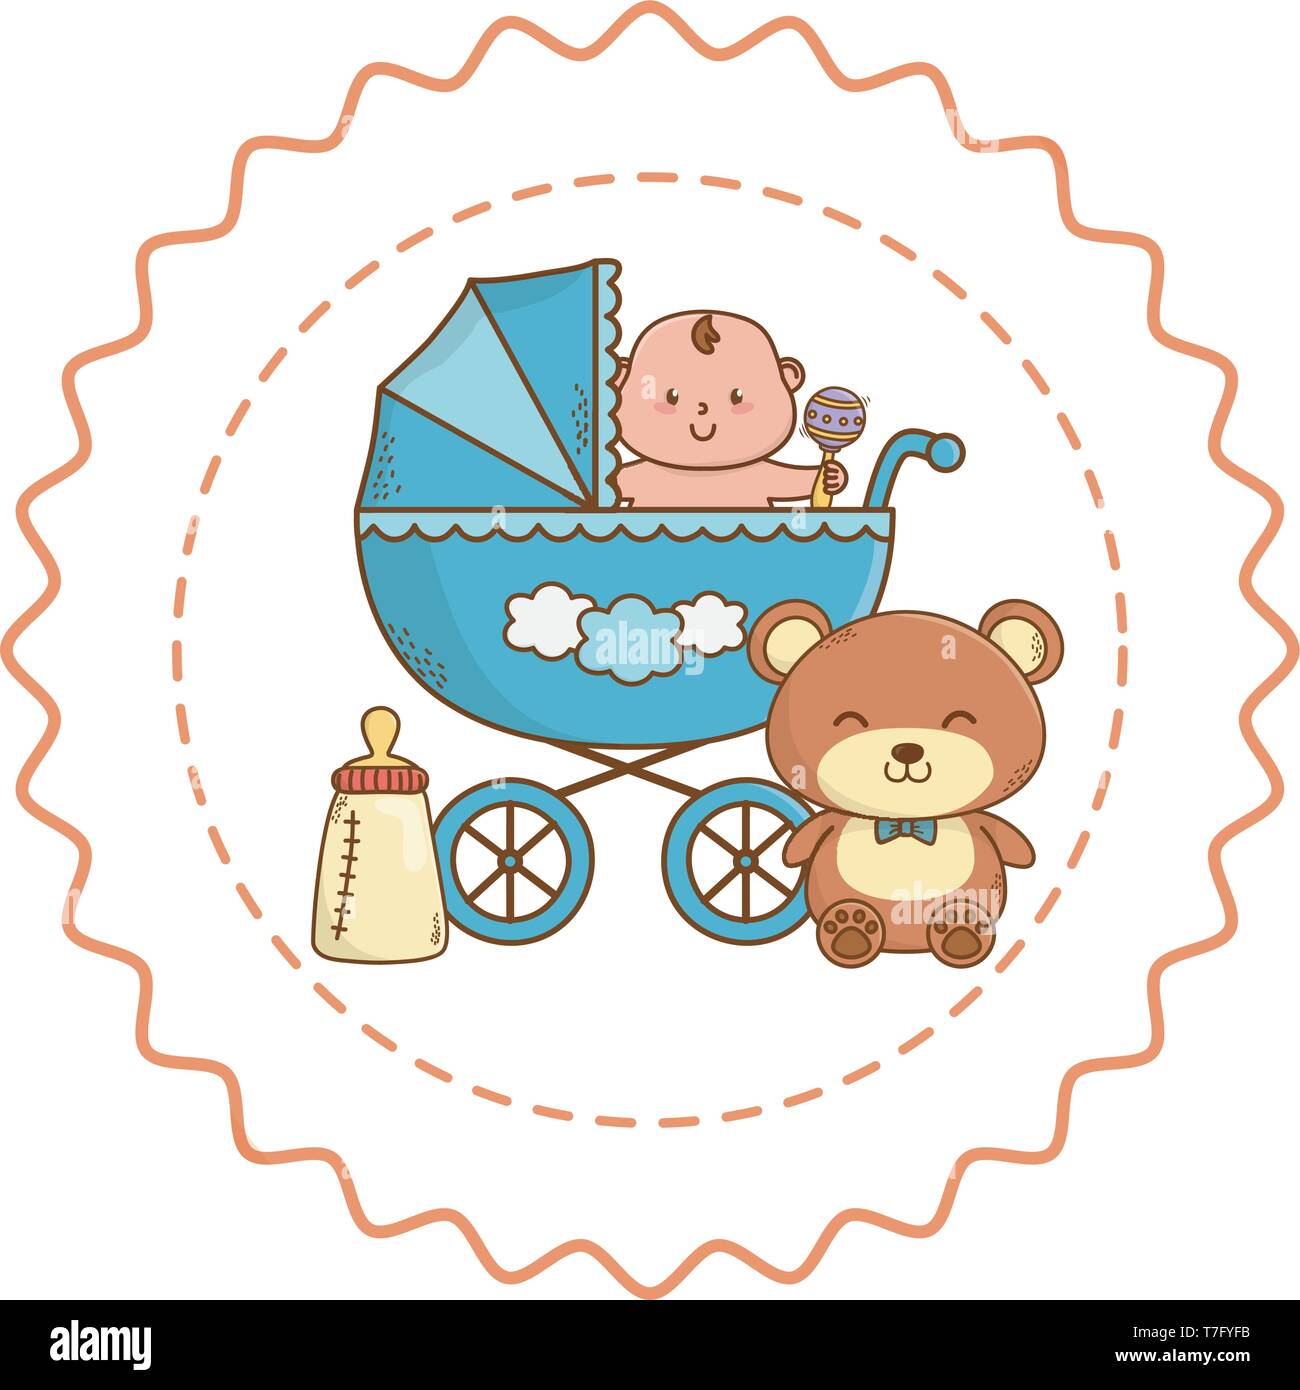 Baby shower pram with baby holding maraca, teddy and bottle cartoons in round label stamp vector illustration graphic design Stock Vector